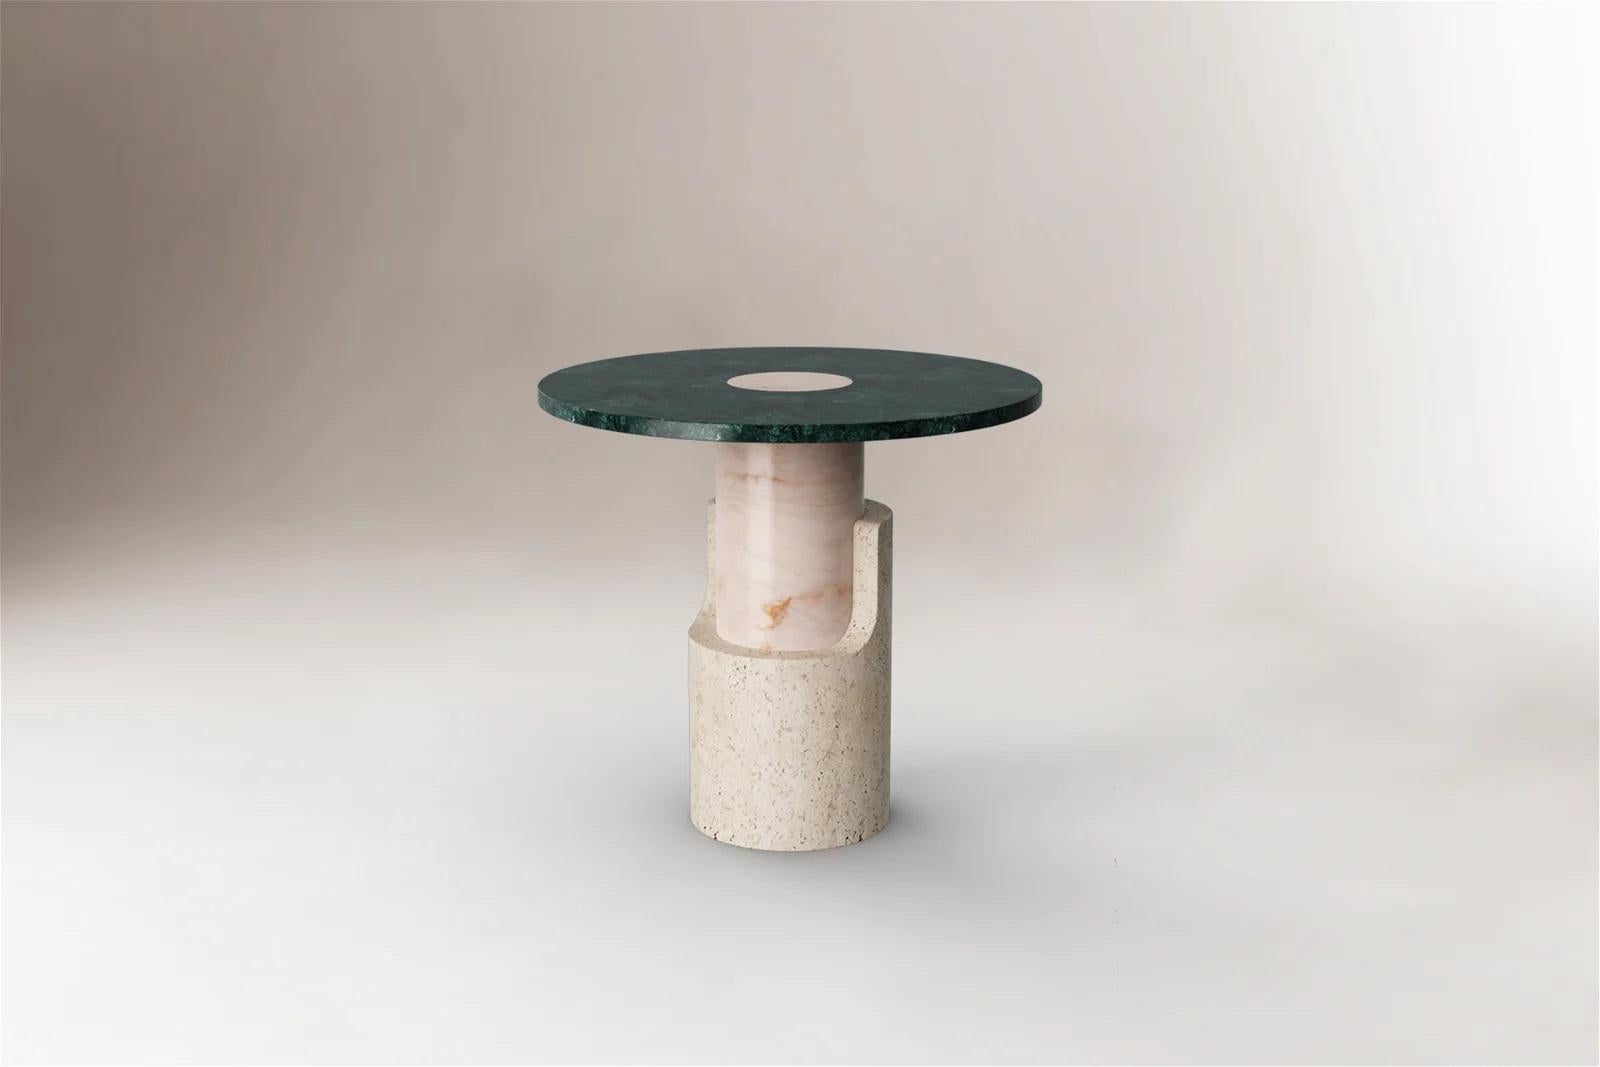 Celebrating a new invented reality, smooth and rough surfaces contrast with one another giving way to a new approach in shape and balance. Braque side table shows a torn and fragmented form, exposing the inner core of its base, which can be seen